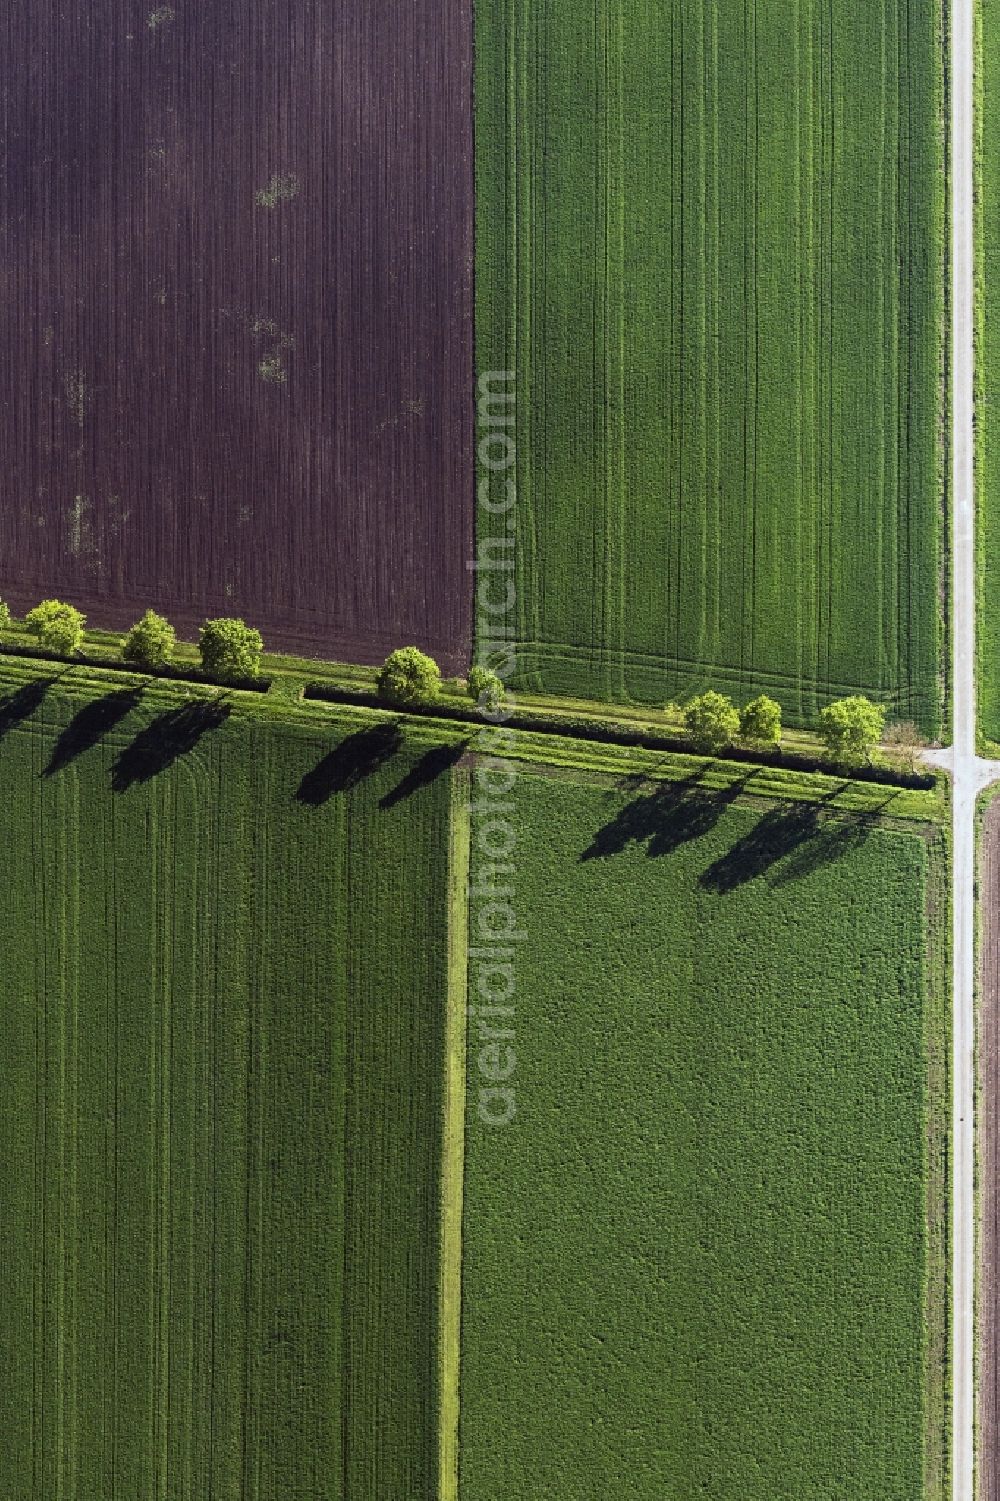 Vertical aerial photograph Nördlingen - Vertical aerial view from the satellite perspective of the tree with shadow forming by light irradiation on a field in Noerdlingen in the state Bavaria, Germany